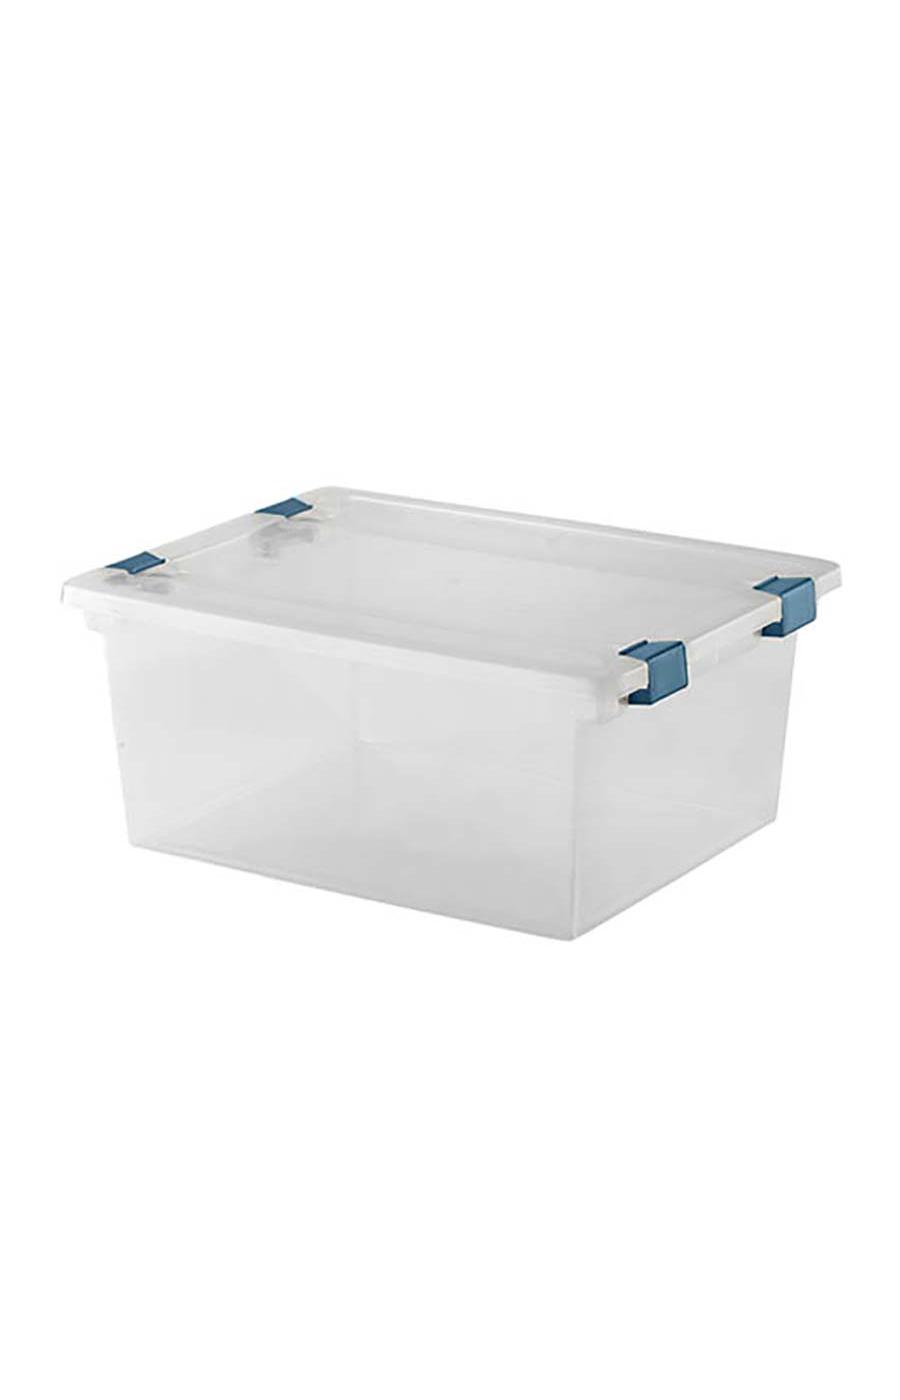 Hemisphere Trading Storage Container with Lid; image 1 of 2